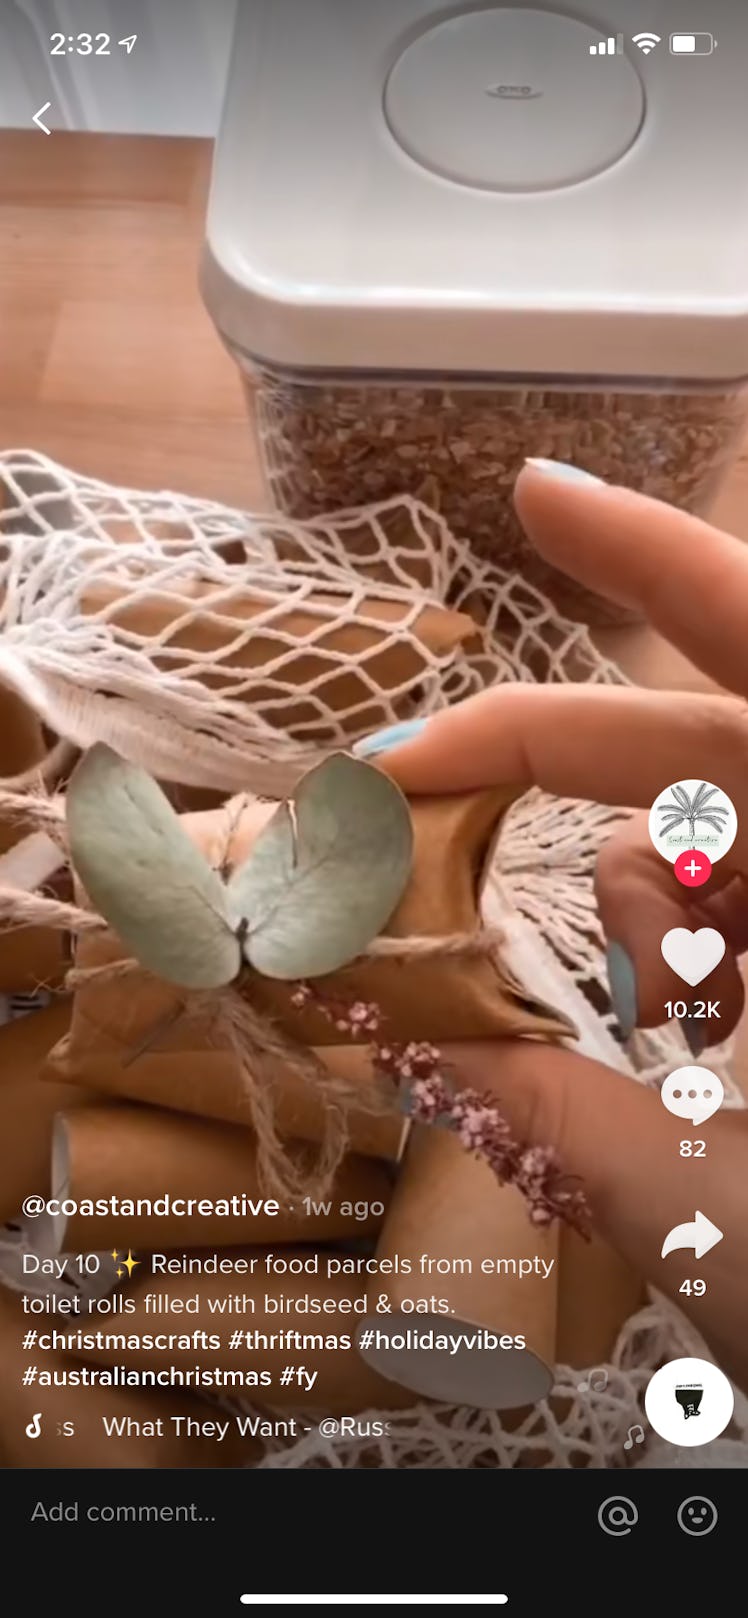 A TikTok crafter turns a toilet paper roll into "reindeer food" for a thriftmas video and DIY gift.